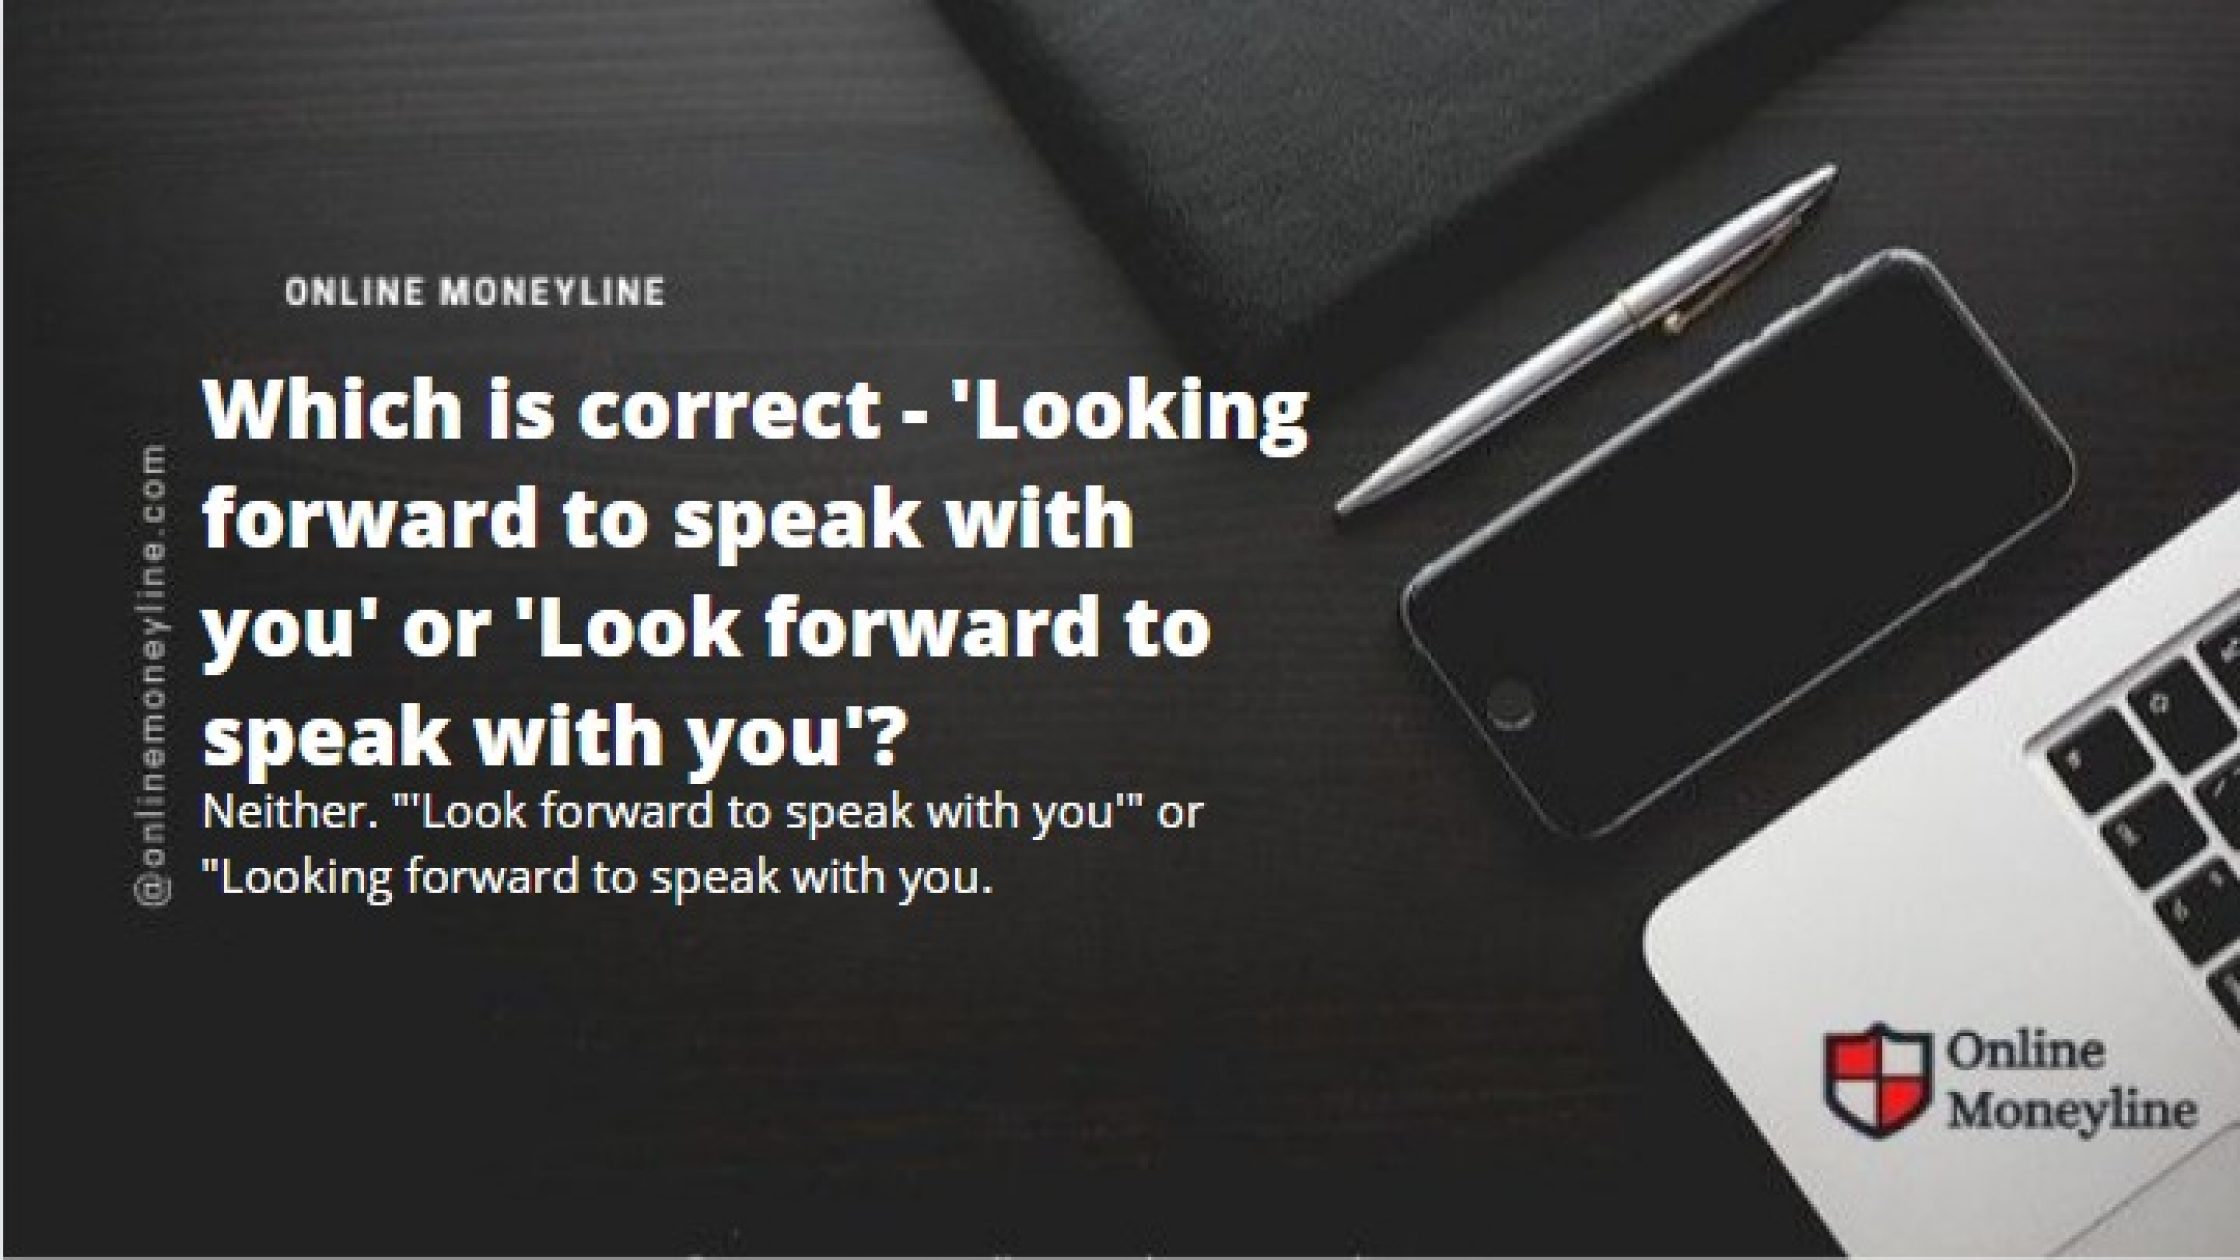 Which is correct – ‘Looking forward to speak with you’ or ‘Look forward to speak with you’?